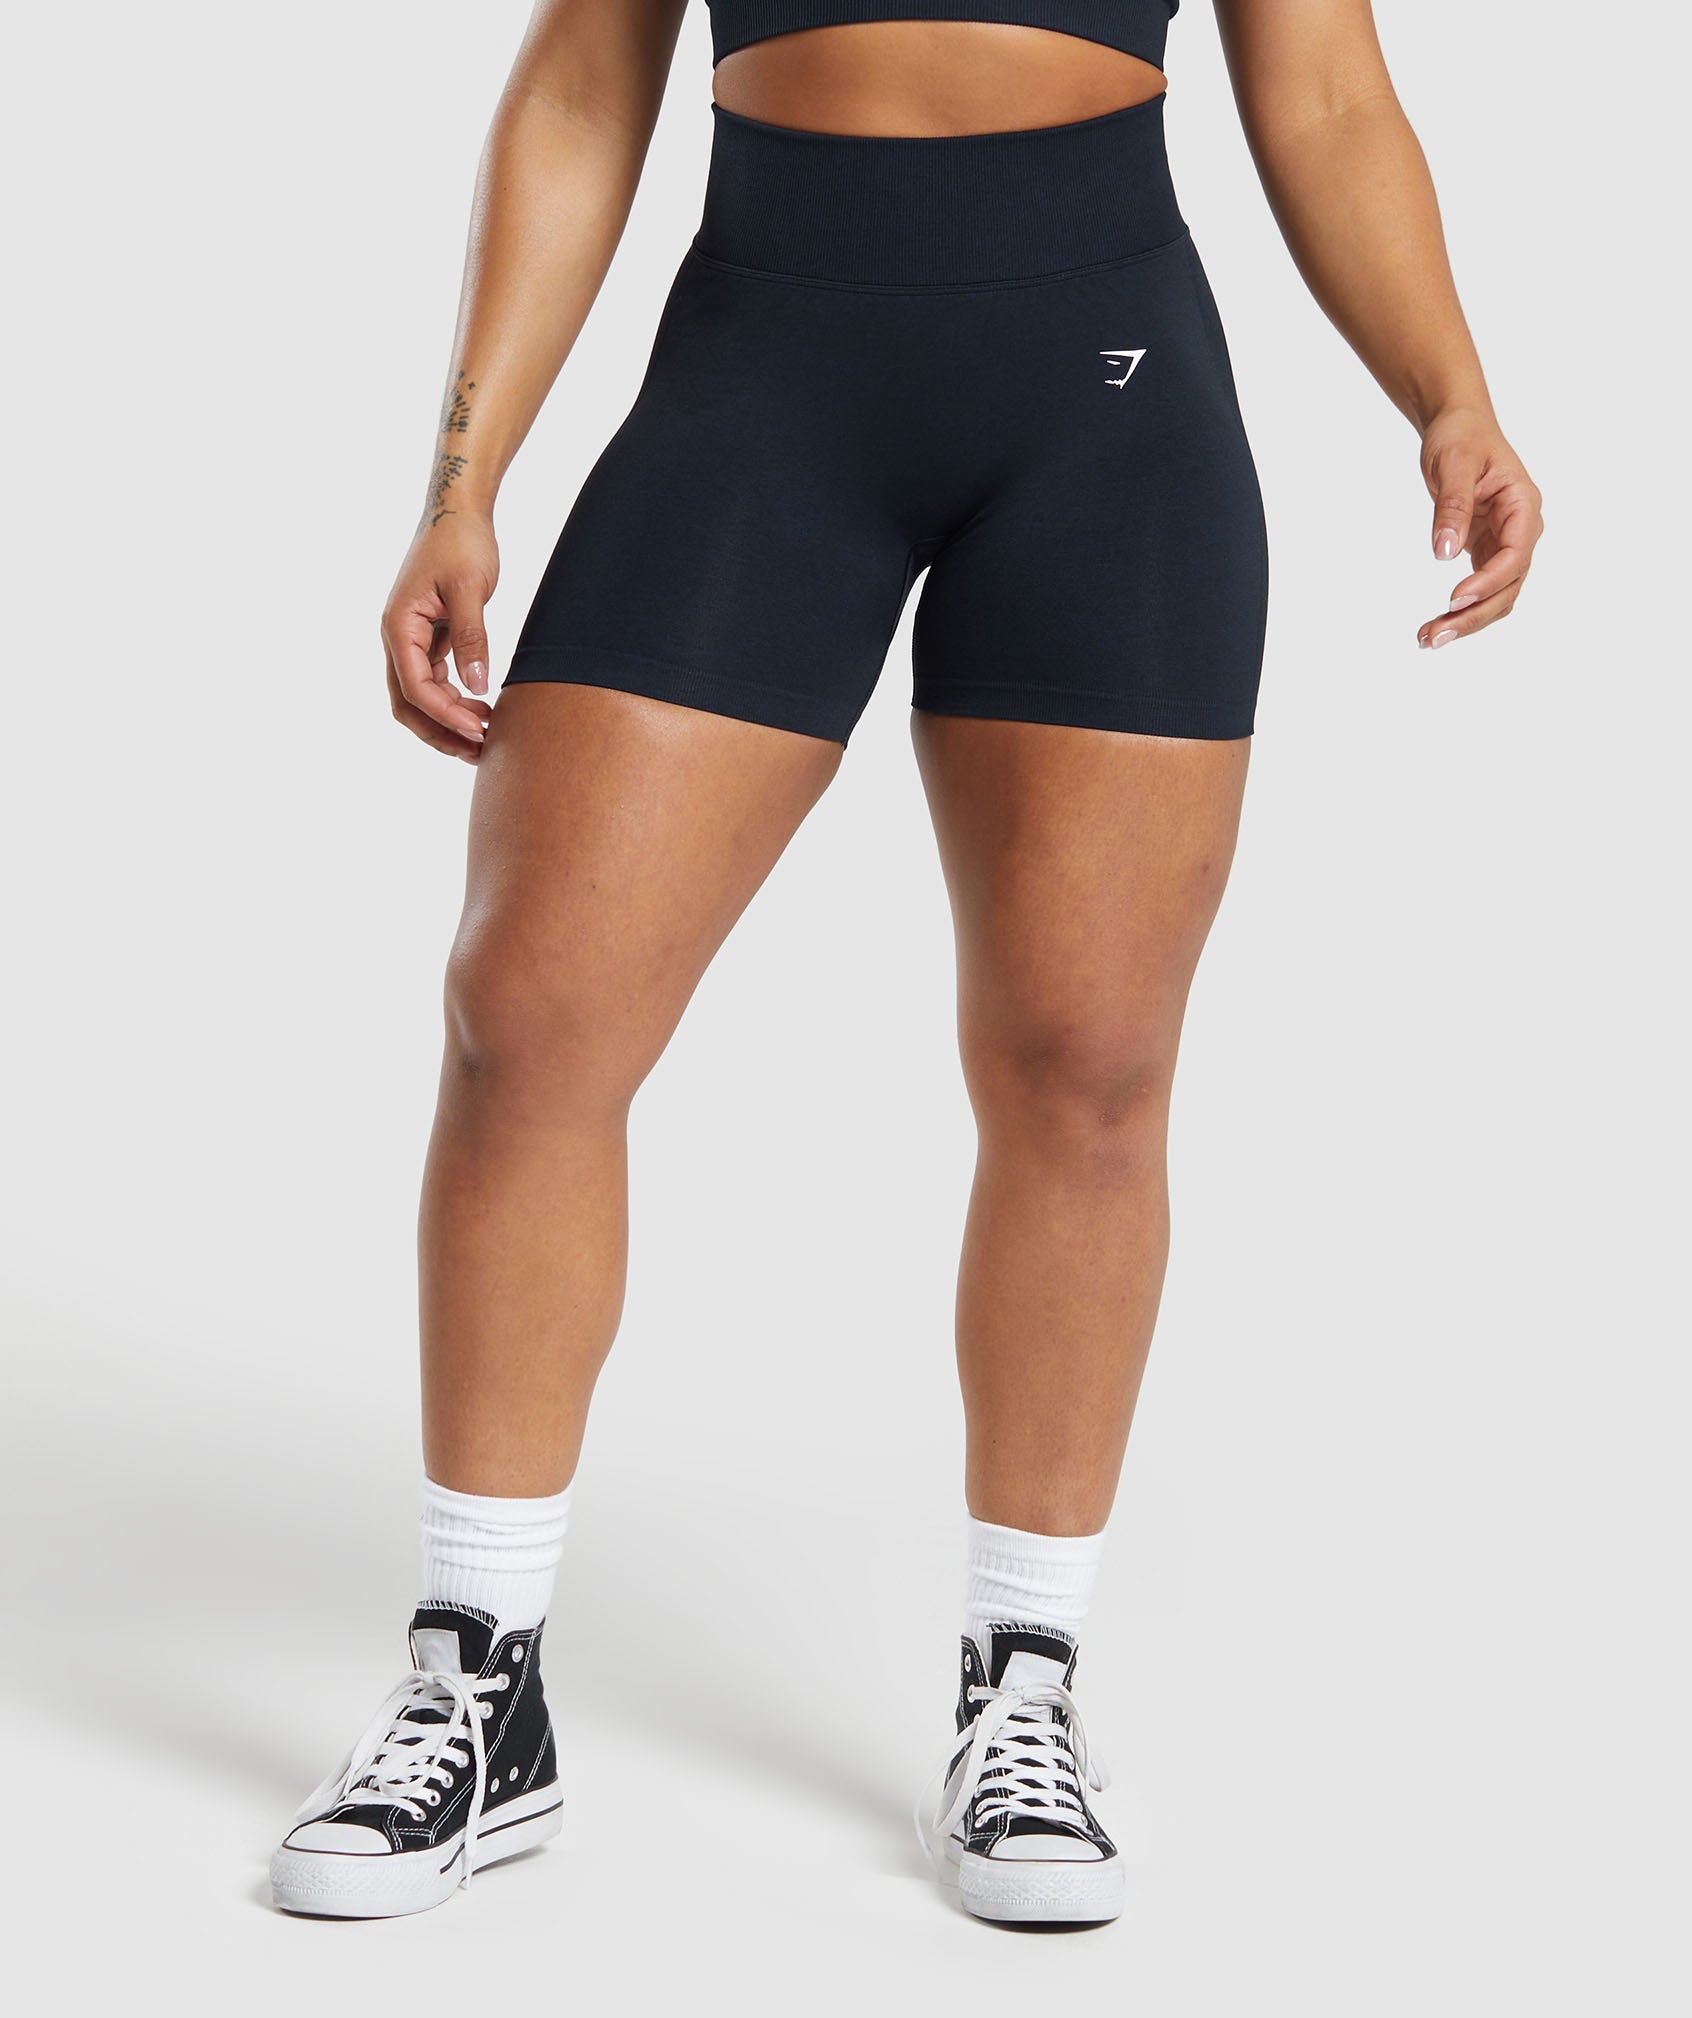 These $15 Workout Shorts Are 's Latest Gymshark Dupe